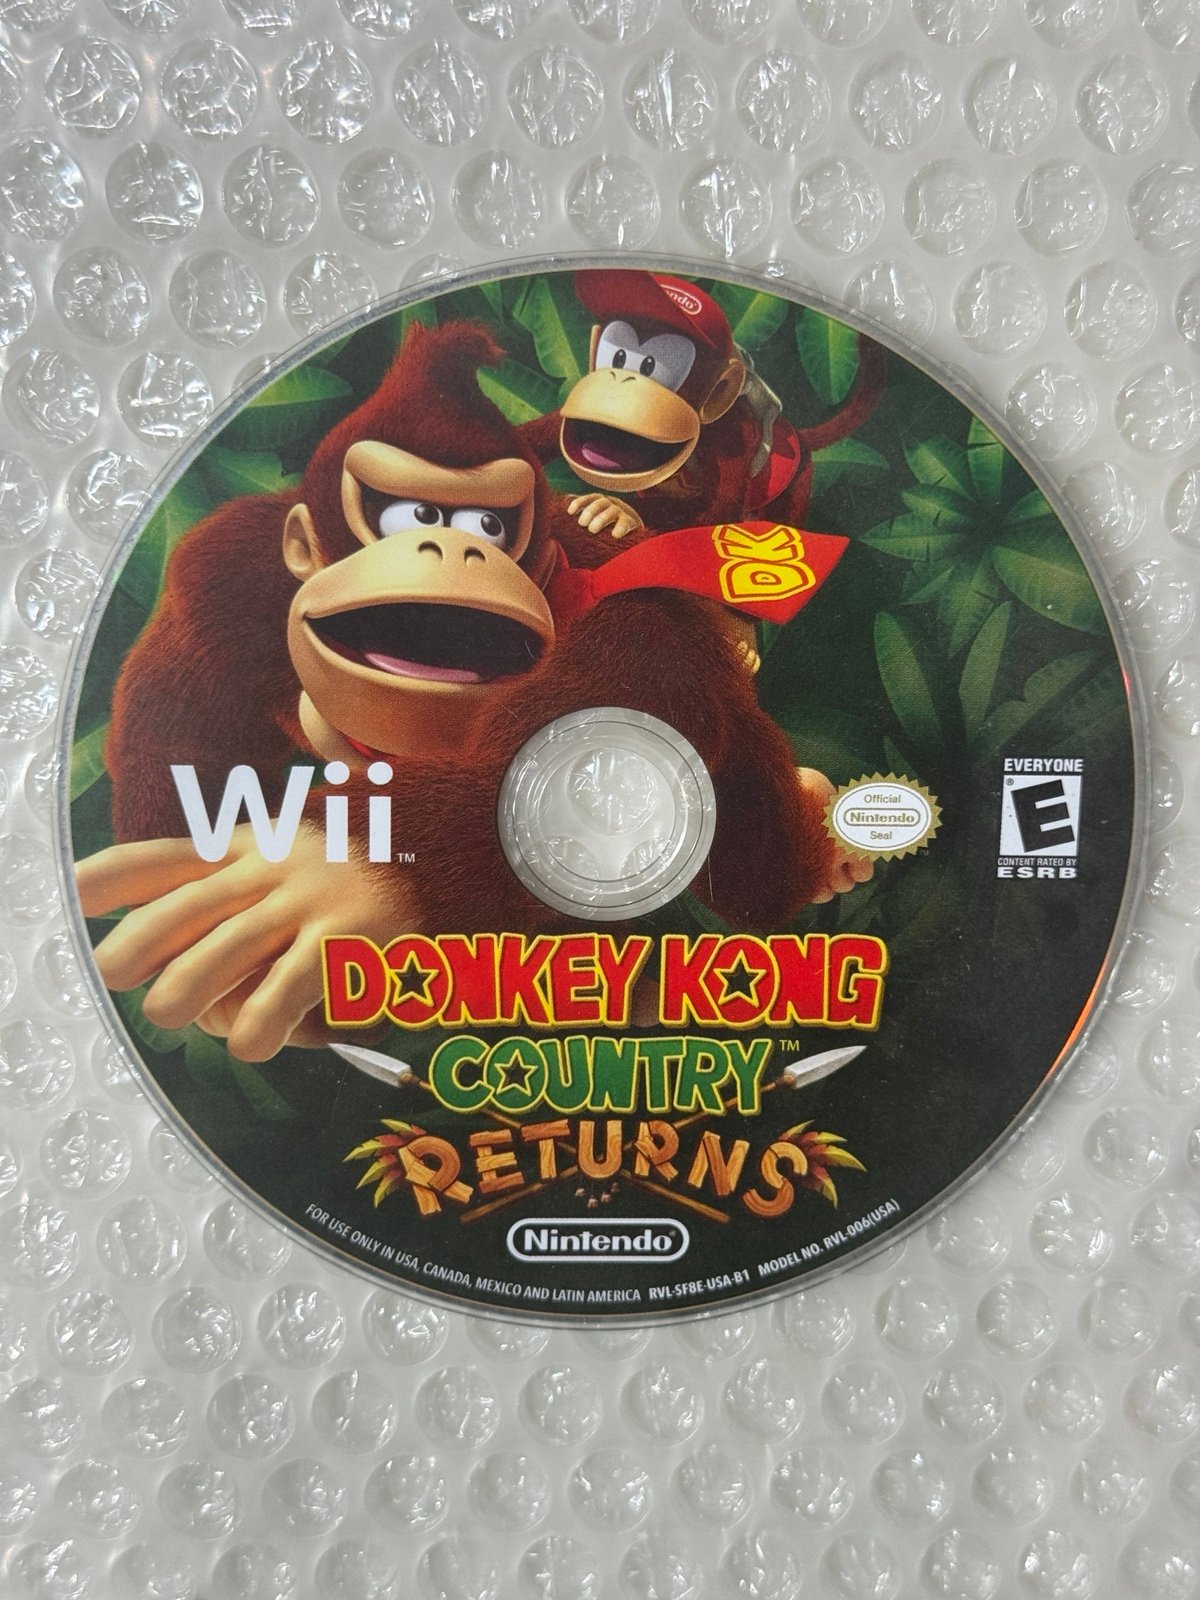 Donkey Kong Country Returns Very Clean Disc for Nintendo Wii SHIPS SAME DAY!!! DQ5EOfrBc